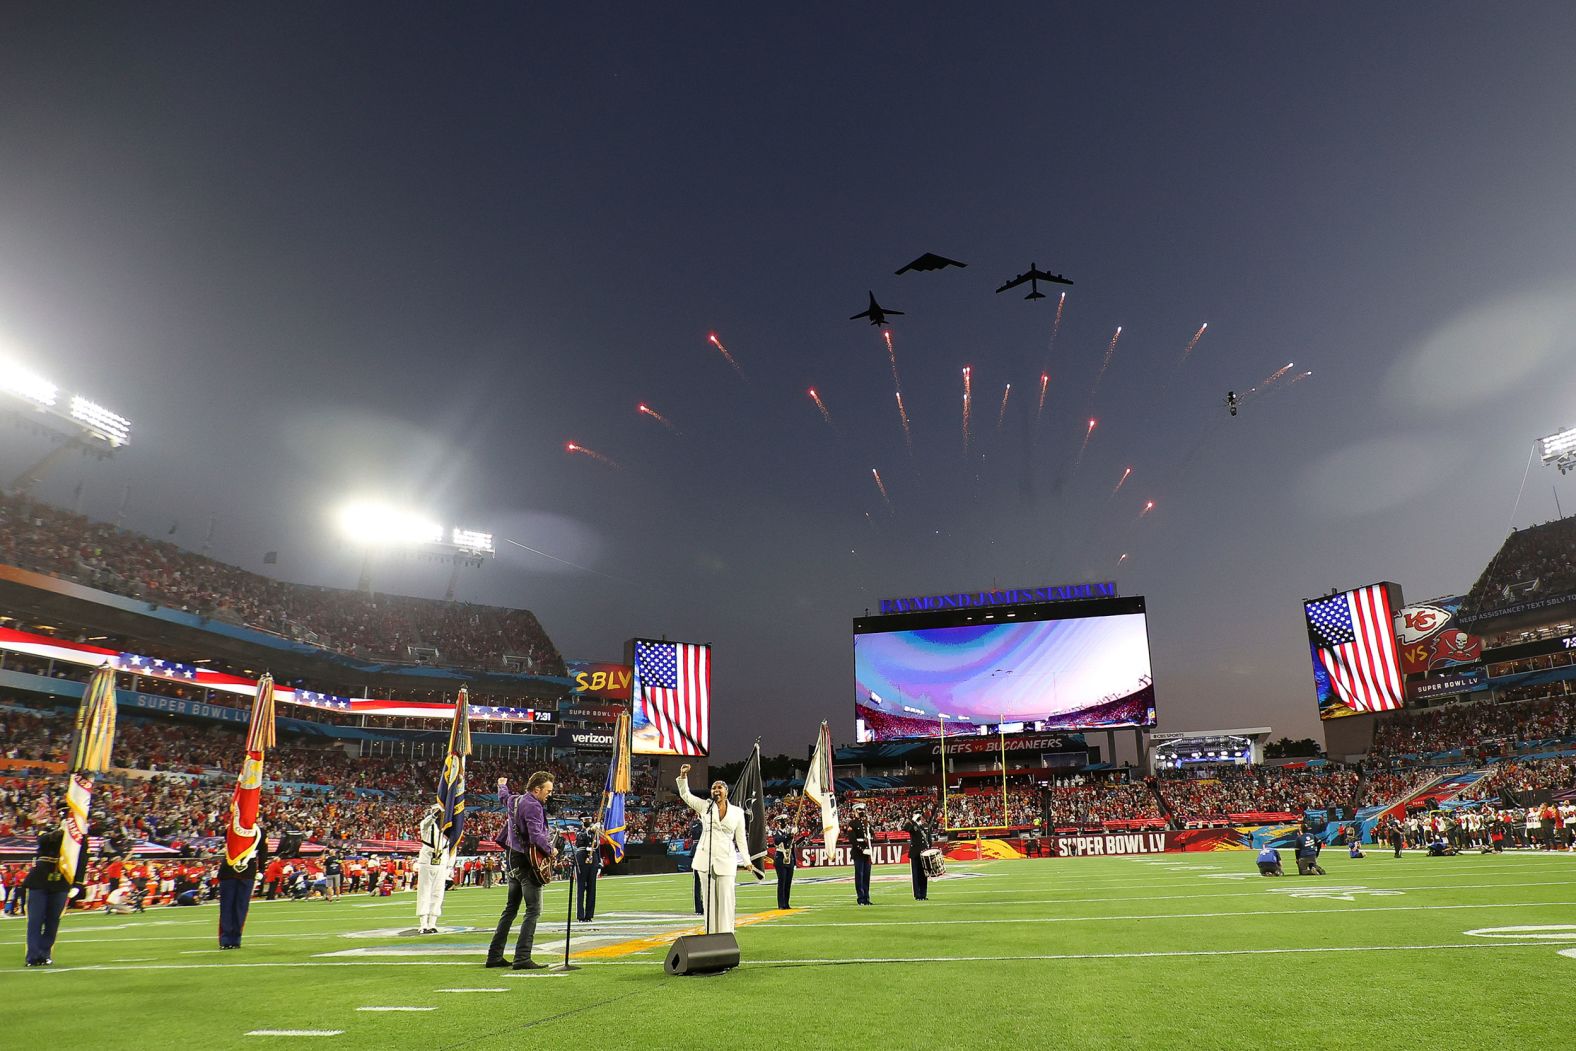 Jets fly over Raymond James Stadium as Eric Church and Jazmine Sullivan perform the National Anthem before the game.